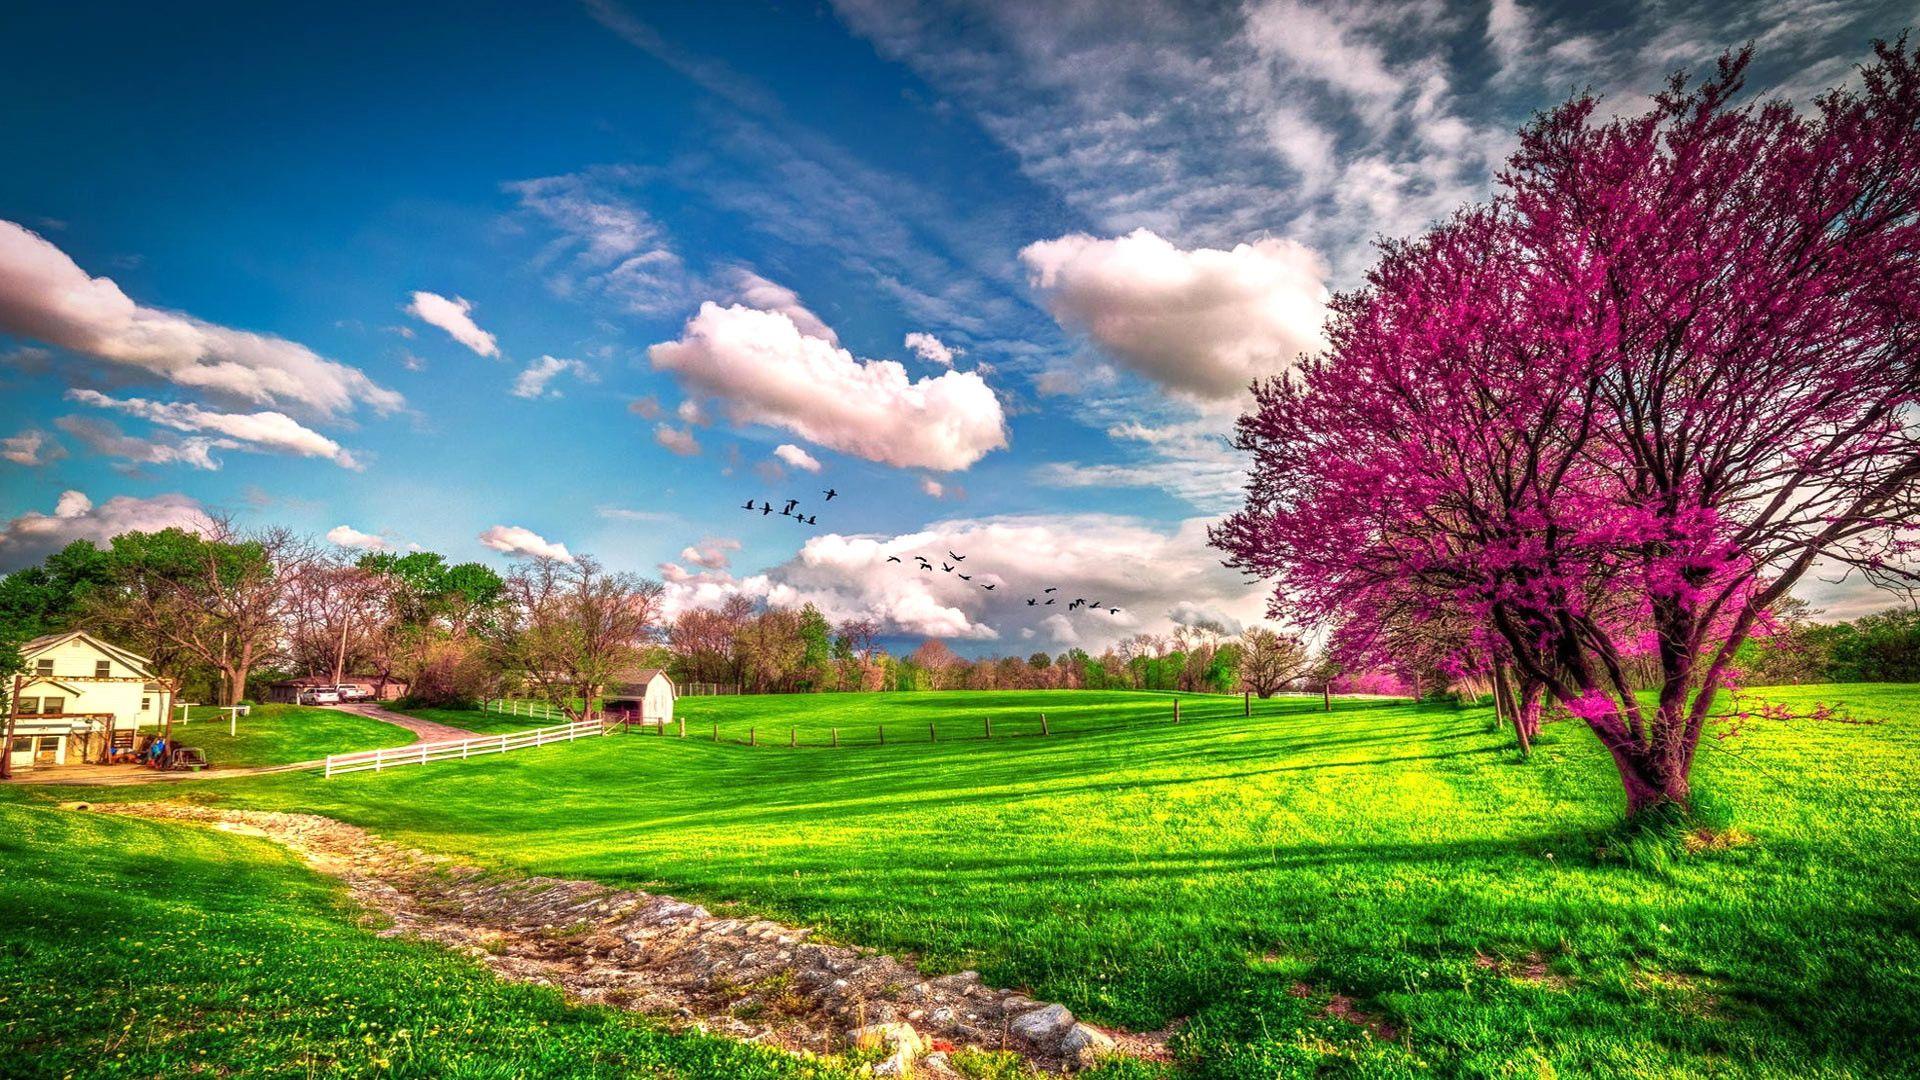 Beautiful Scenery Of Scenic Nature Wallpaper Download | MobCup